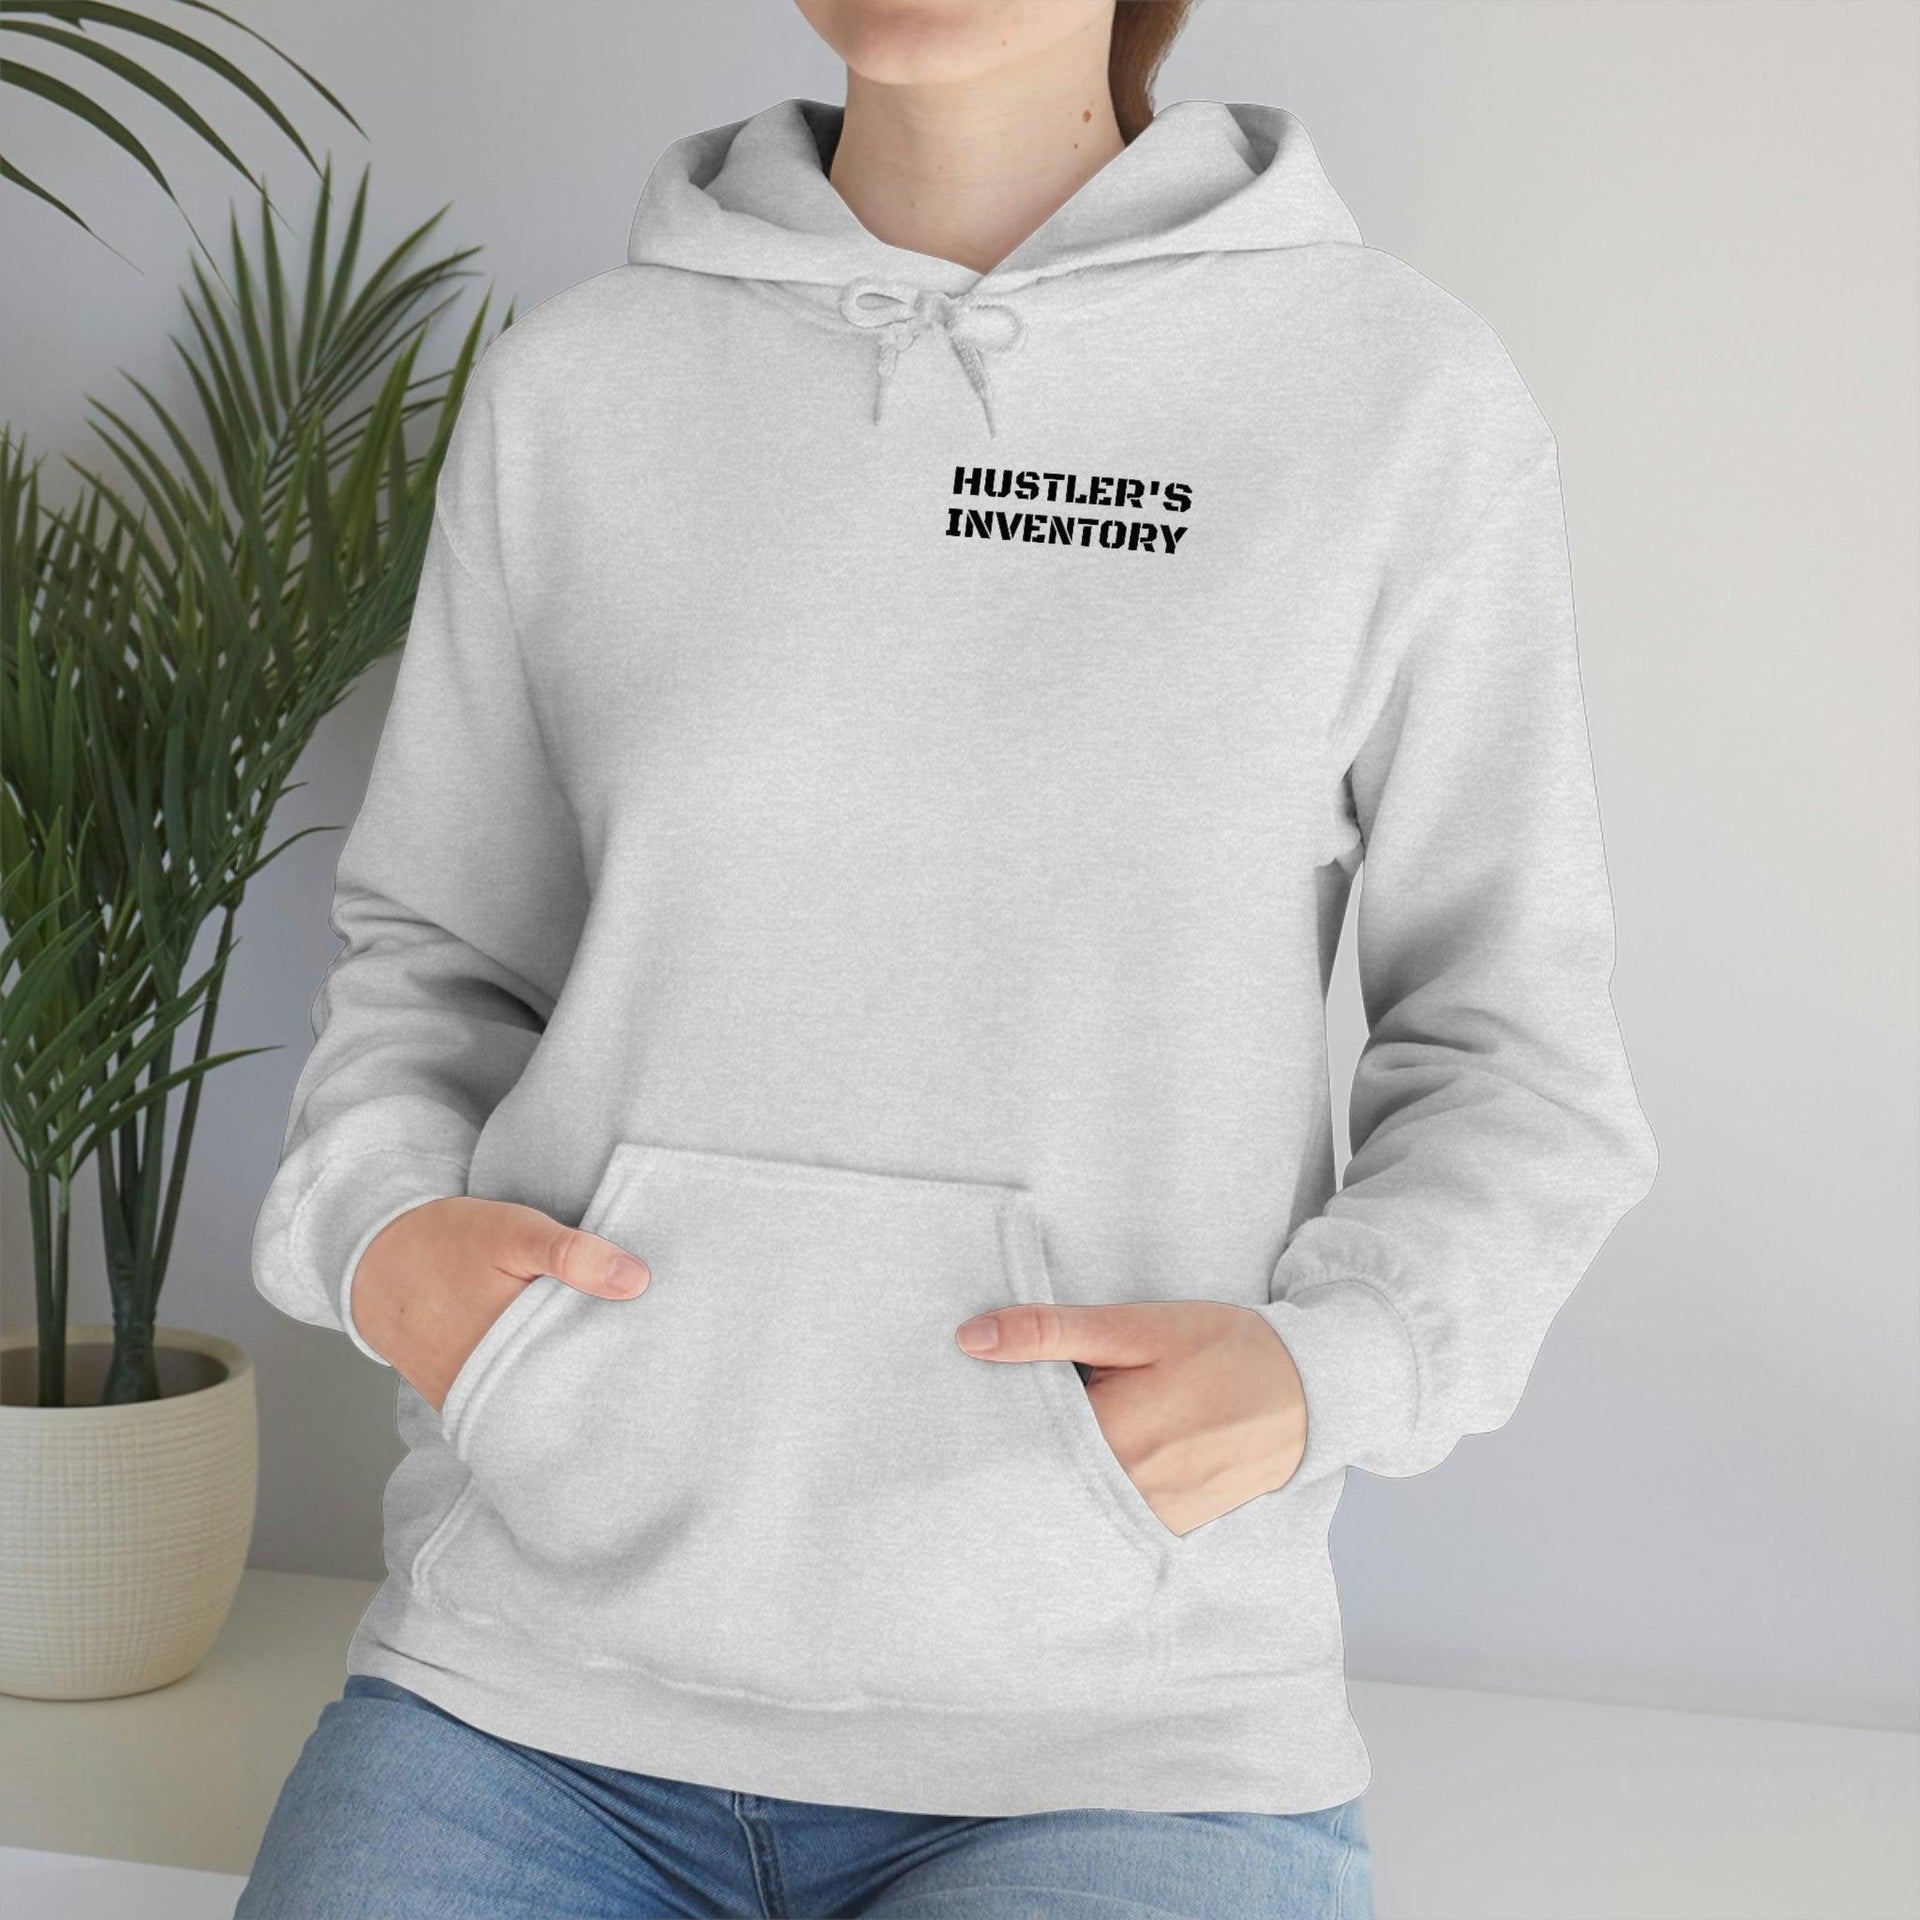 Stay motivated in style with an Andrew Tate sweatshirt featuring the quote 'There is no joy without pain.' Available worldwide in multiple sizes and at affordable prices.